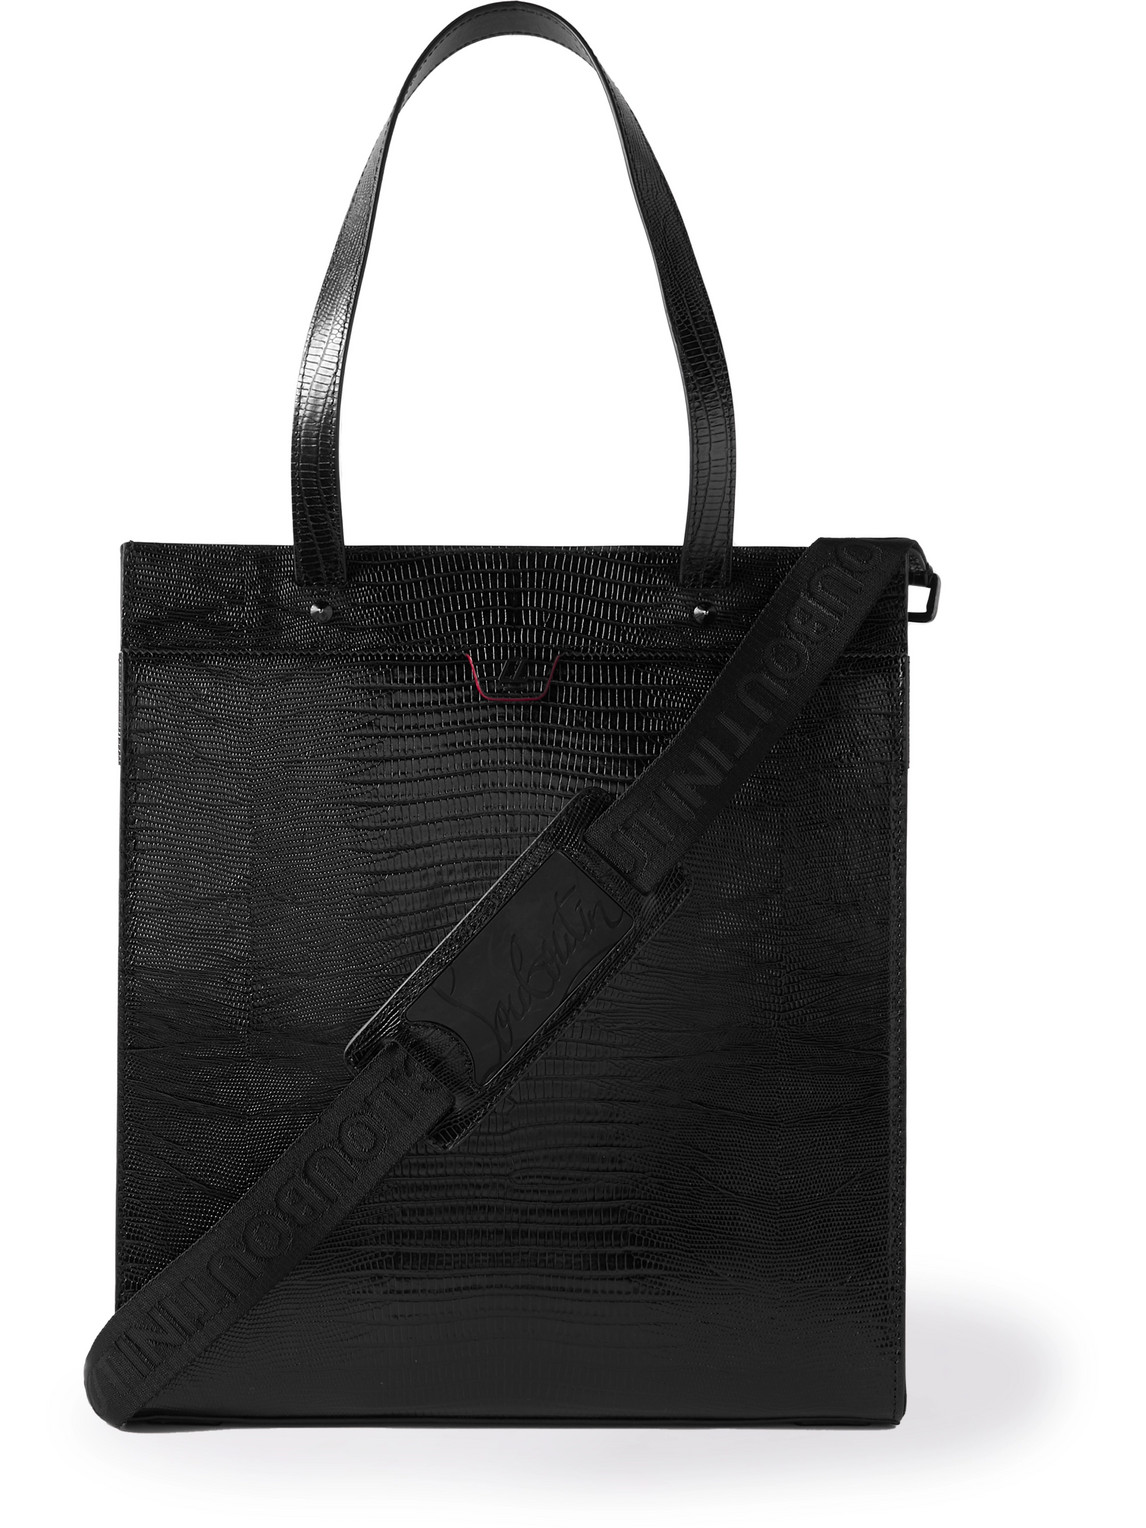 Studded Croc-Effect Leather Tote Bag